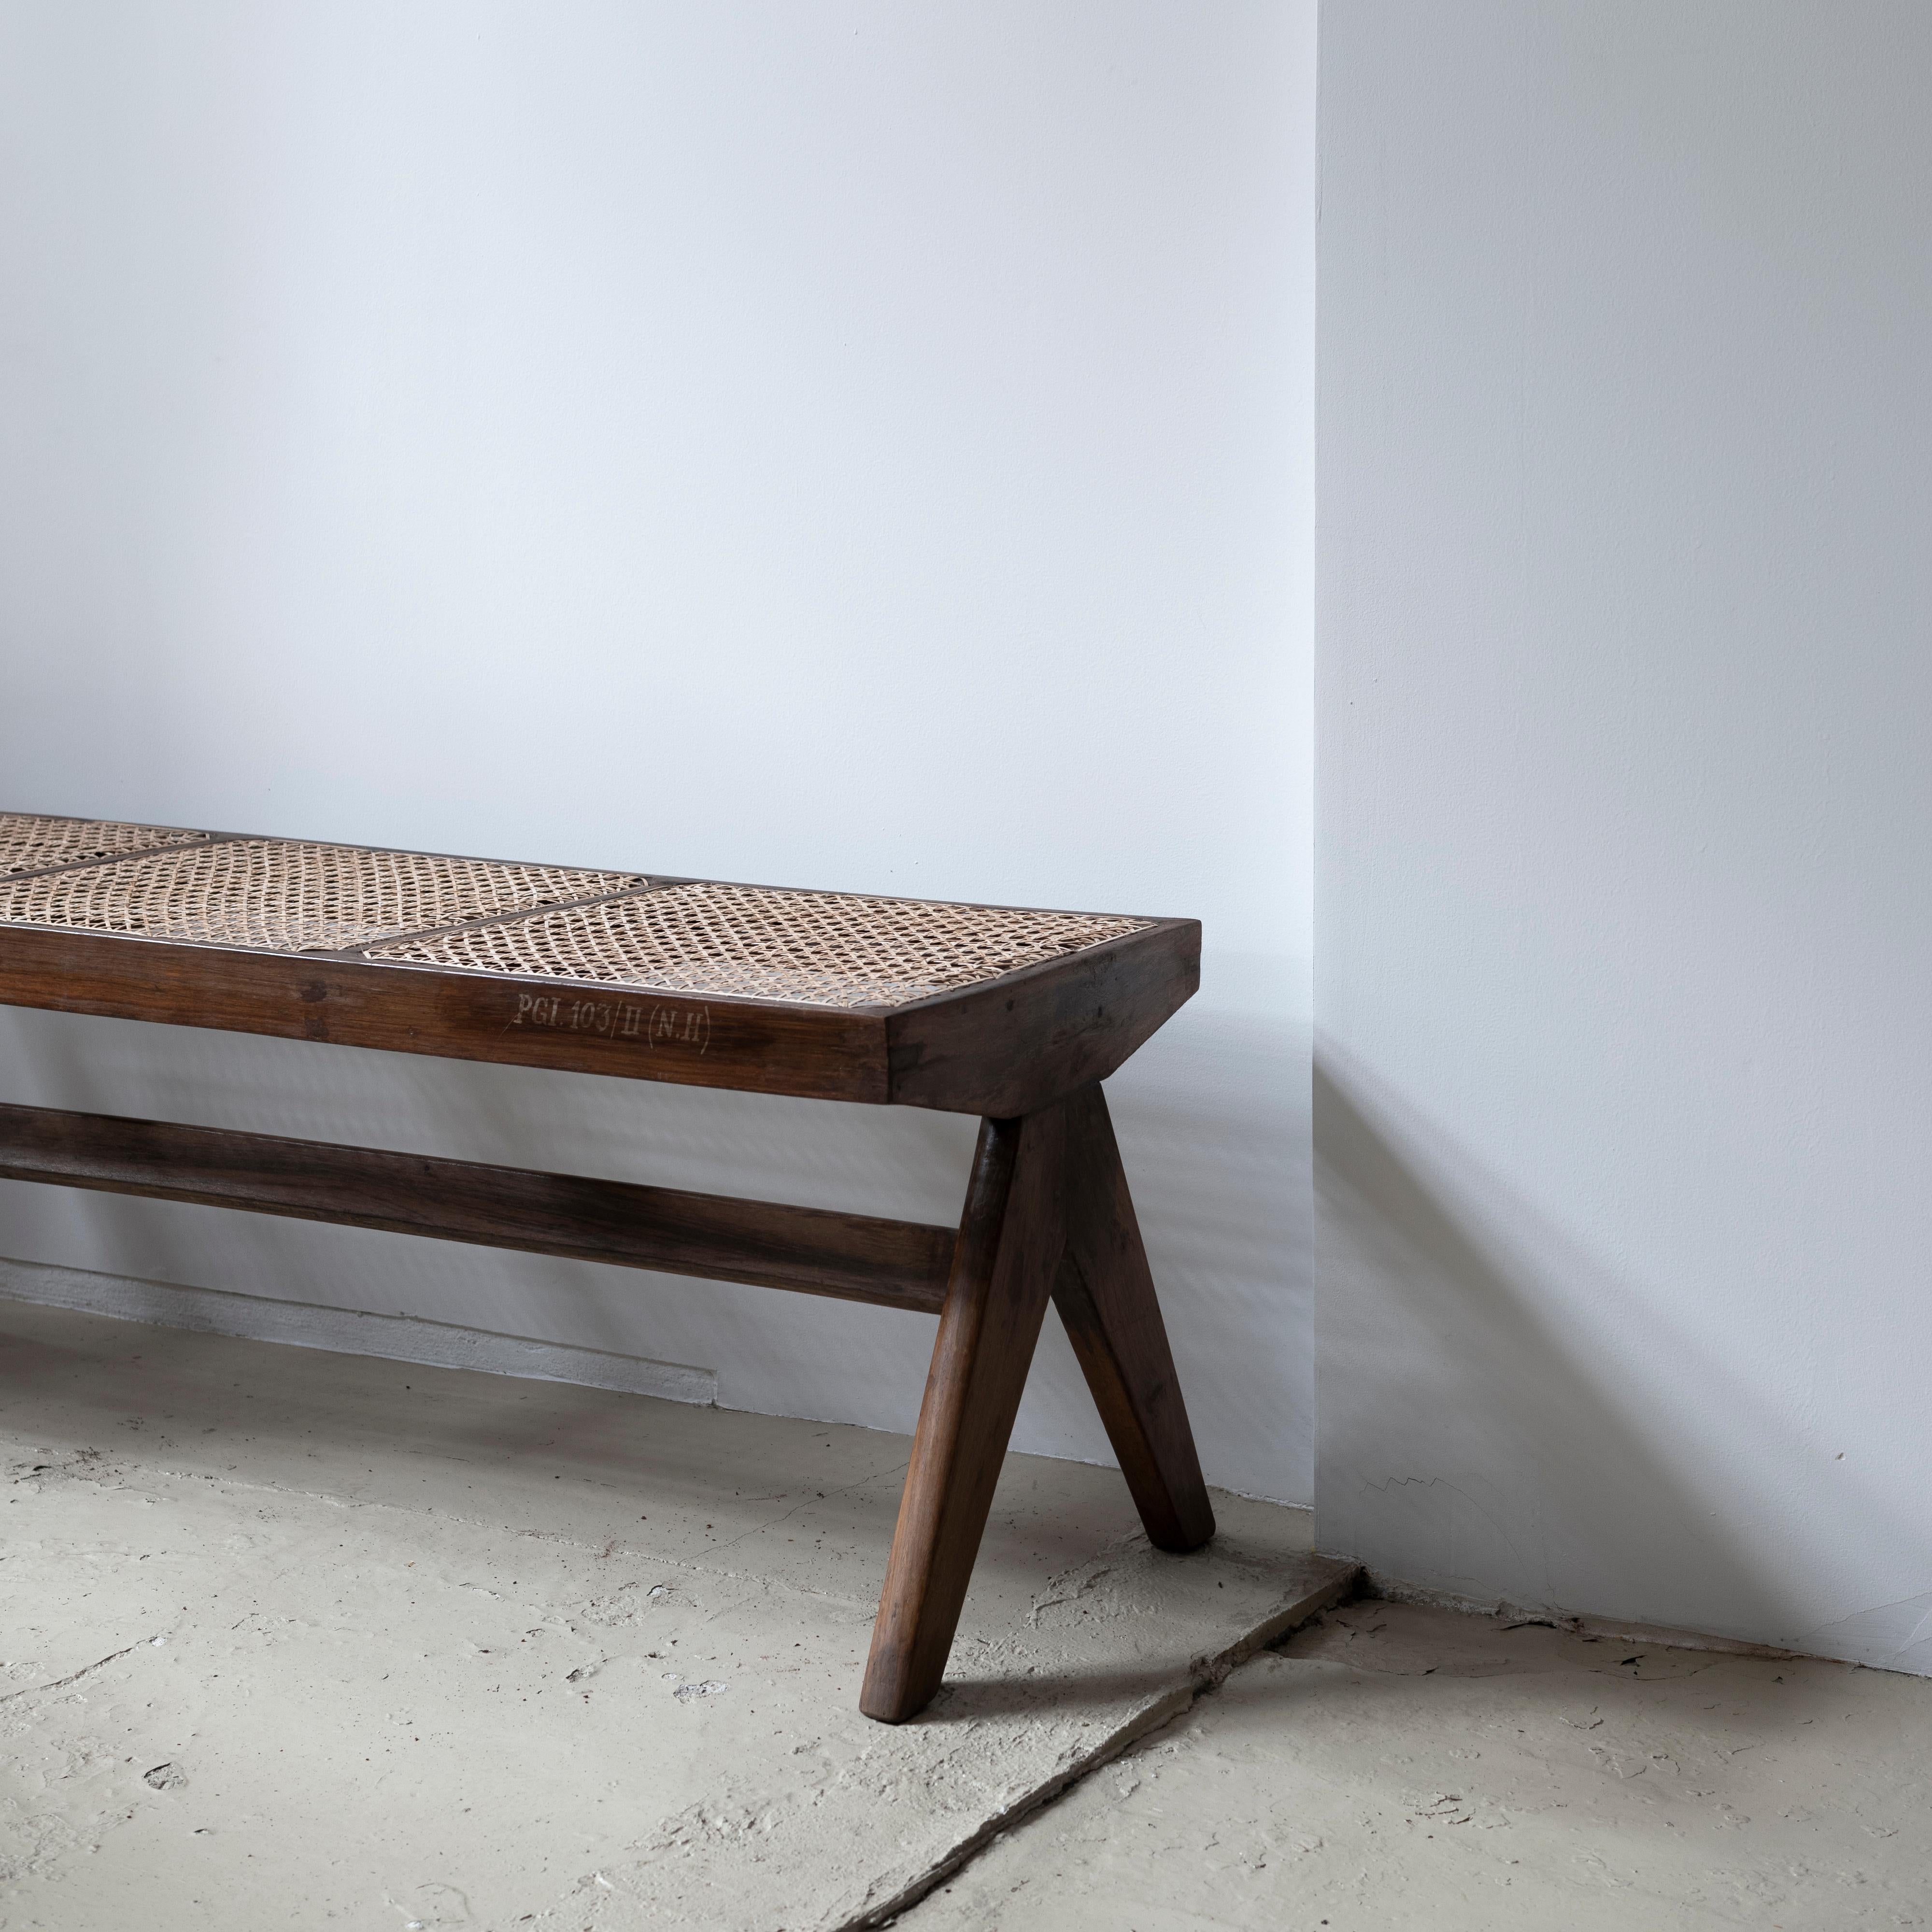 Mid-20th Century Pierre Jeanneret Teak and Cane Bench, Post-Graduate Institute, Chandigarh